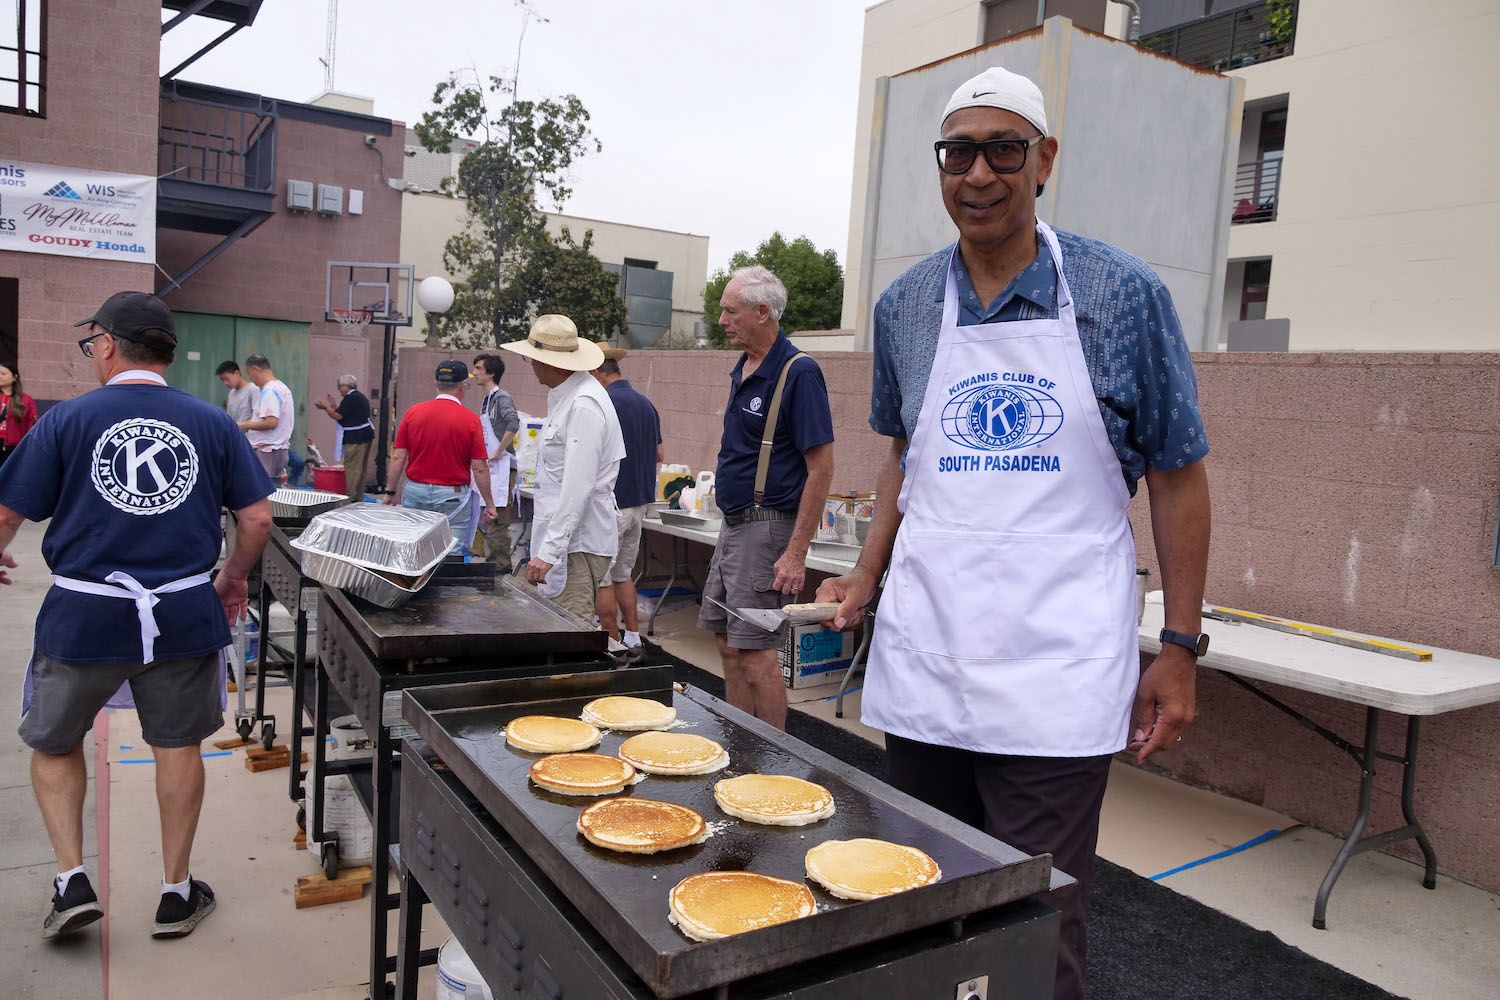 PHOTO: Esteban Lopez | South Pasadena.com News | Assemblymember Chris Holden pitches in on the pancake line at the annual Kiwanis pancake breakfast on July 4th, 2023.